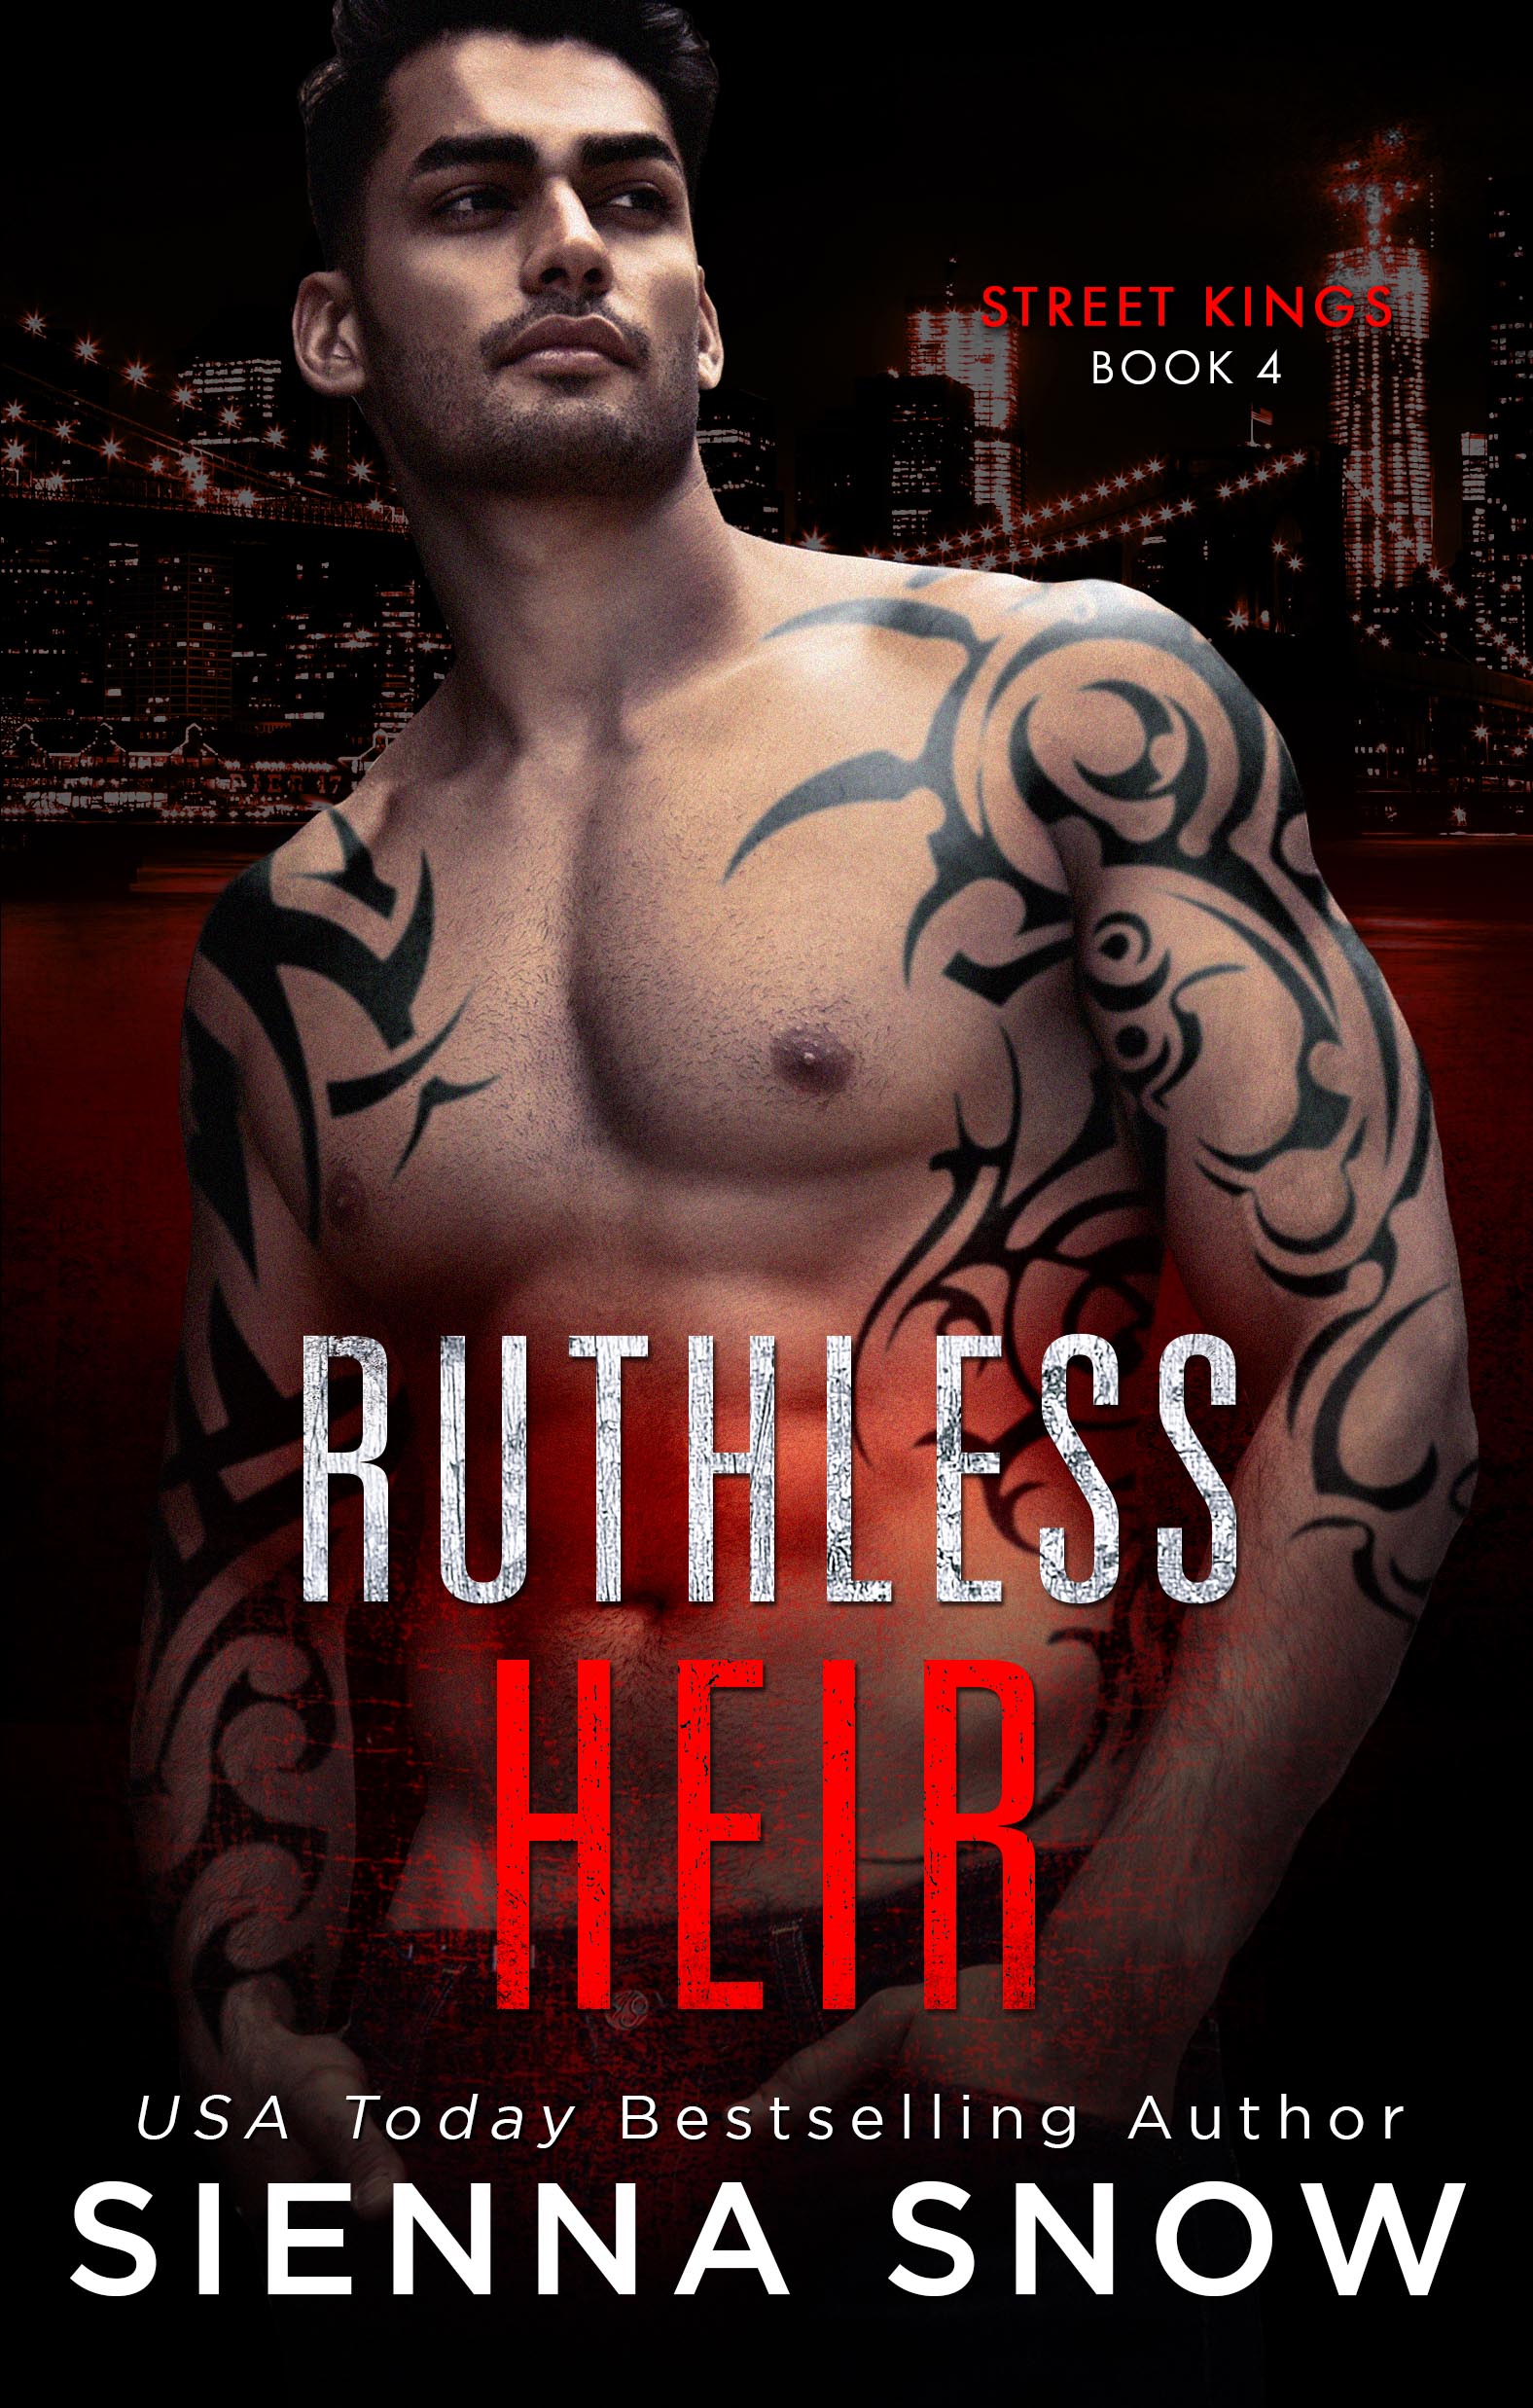 Ruthless Heir by Sienna Snow PDF Download